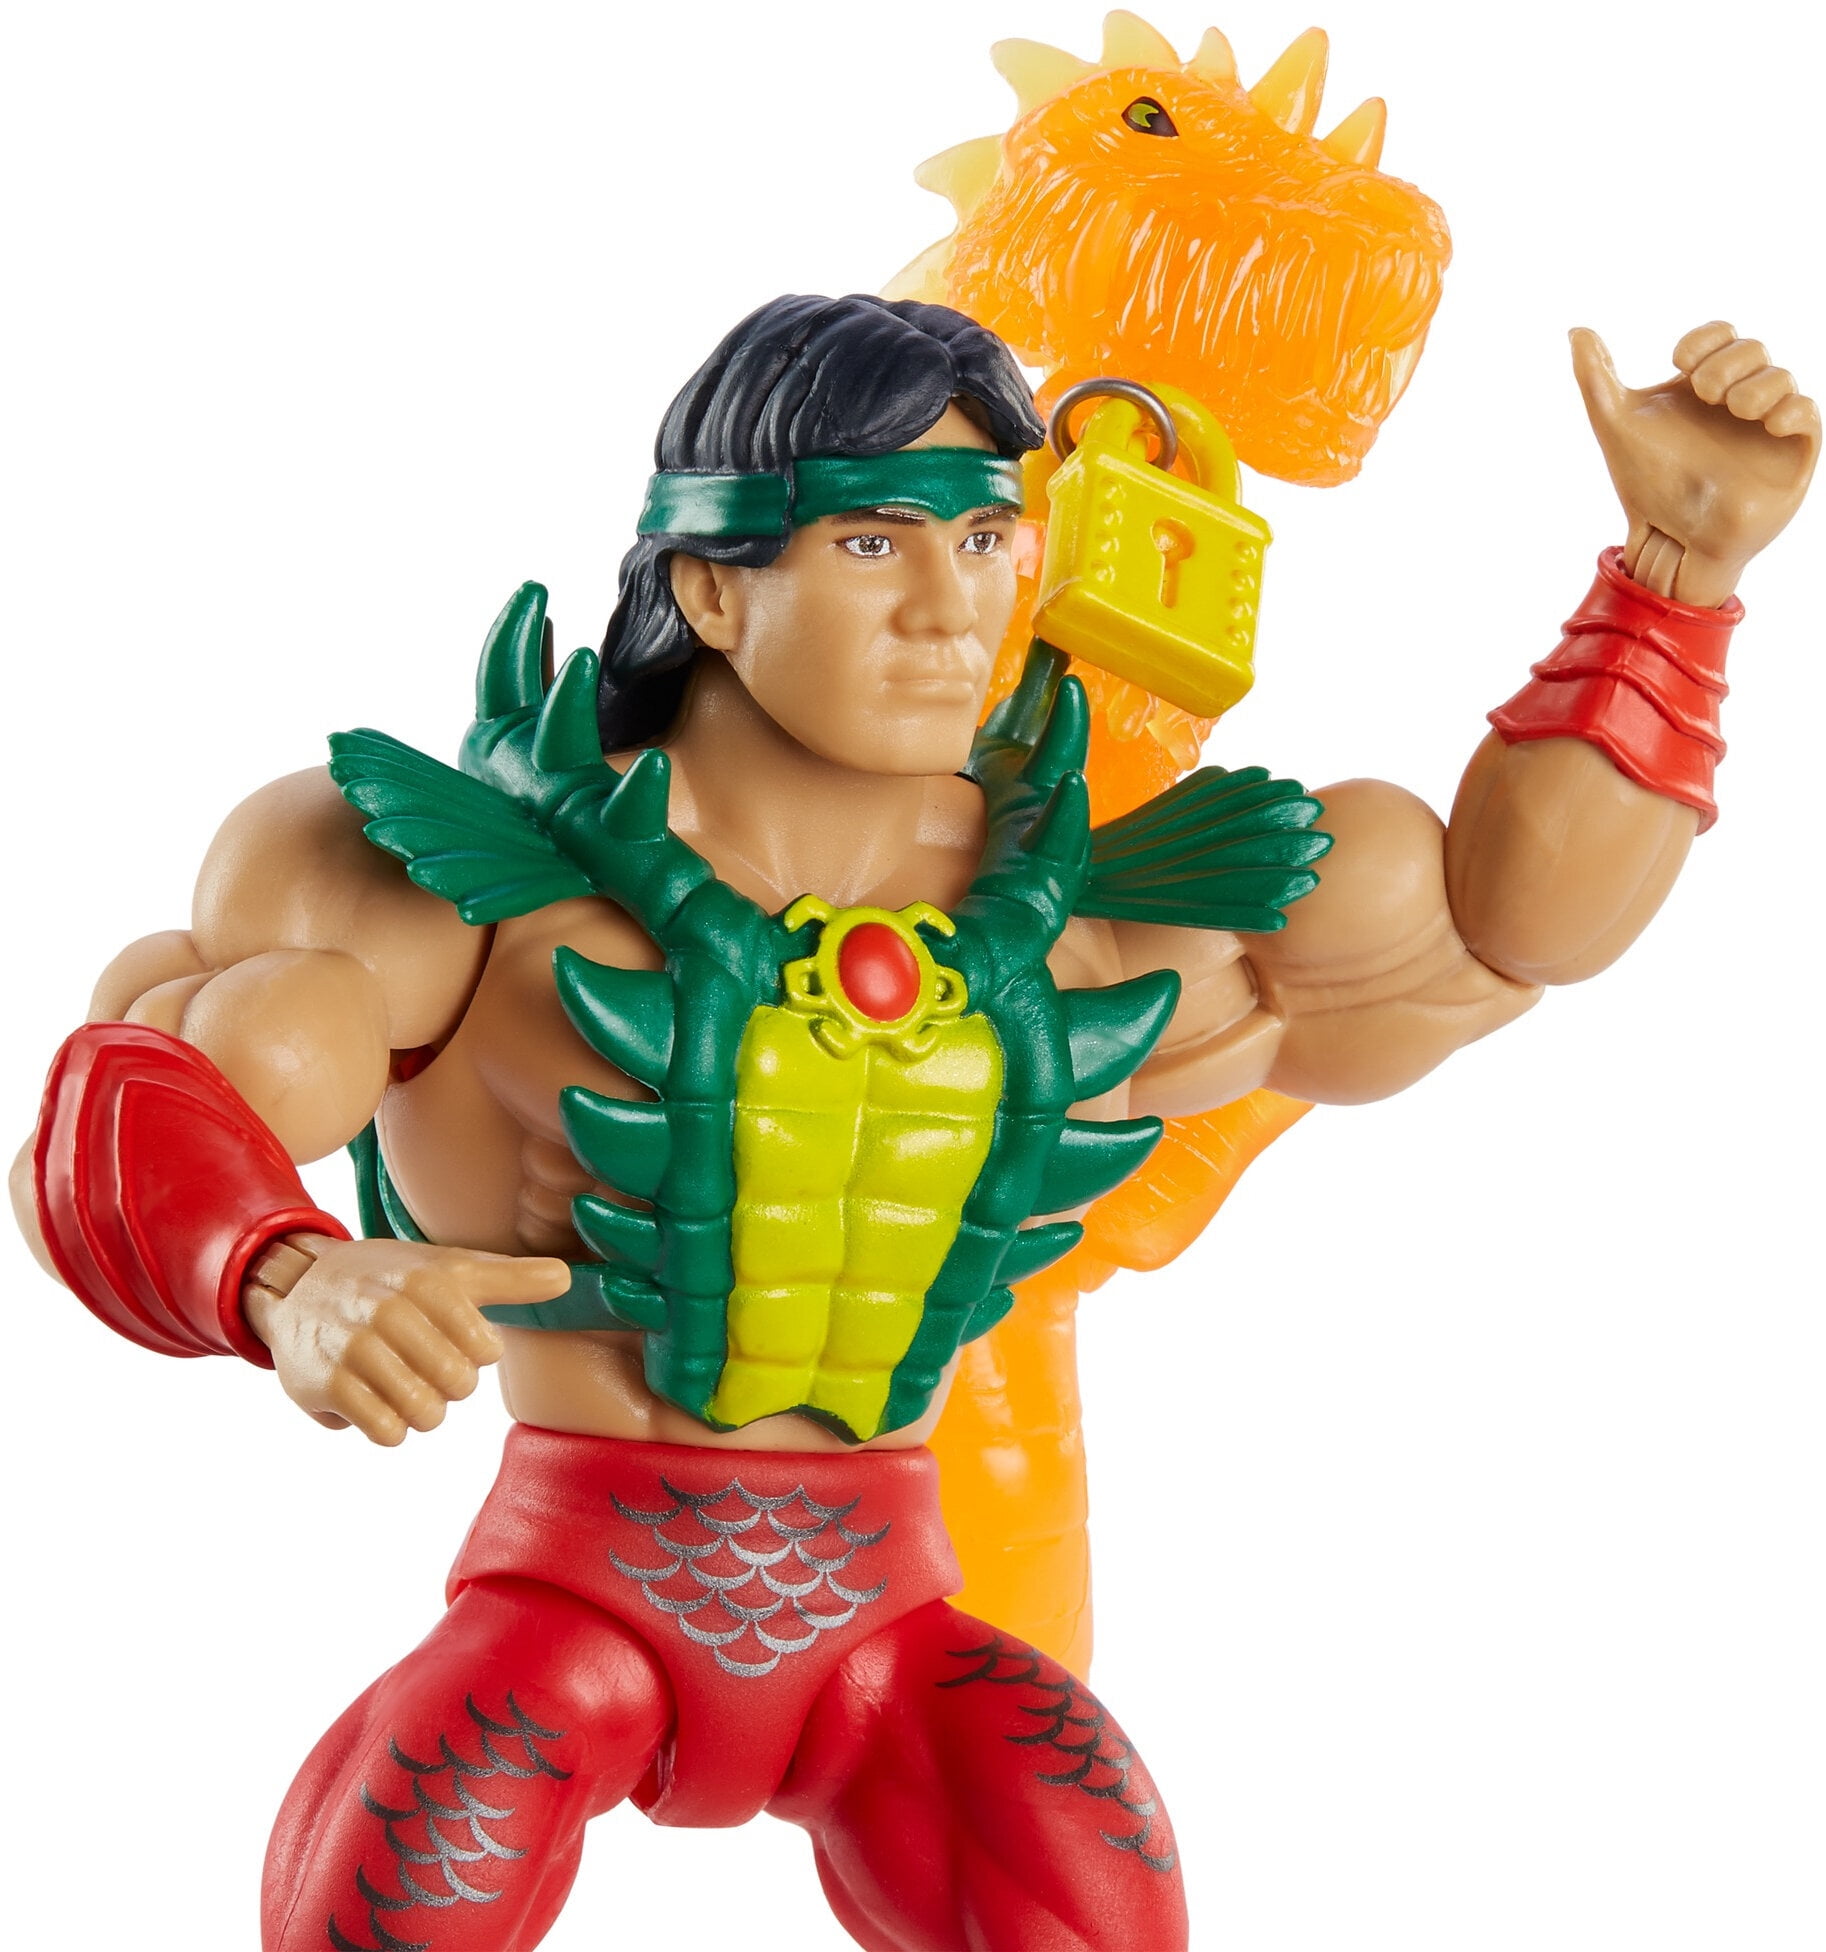 Details about   1986 LJN Ricky The Dragon Steamboat WWF Wrestling Figure NM 